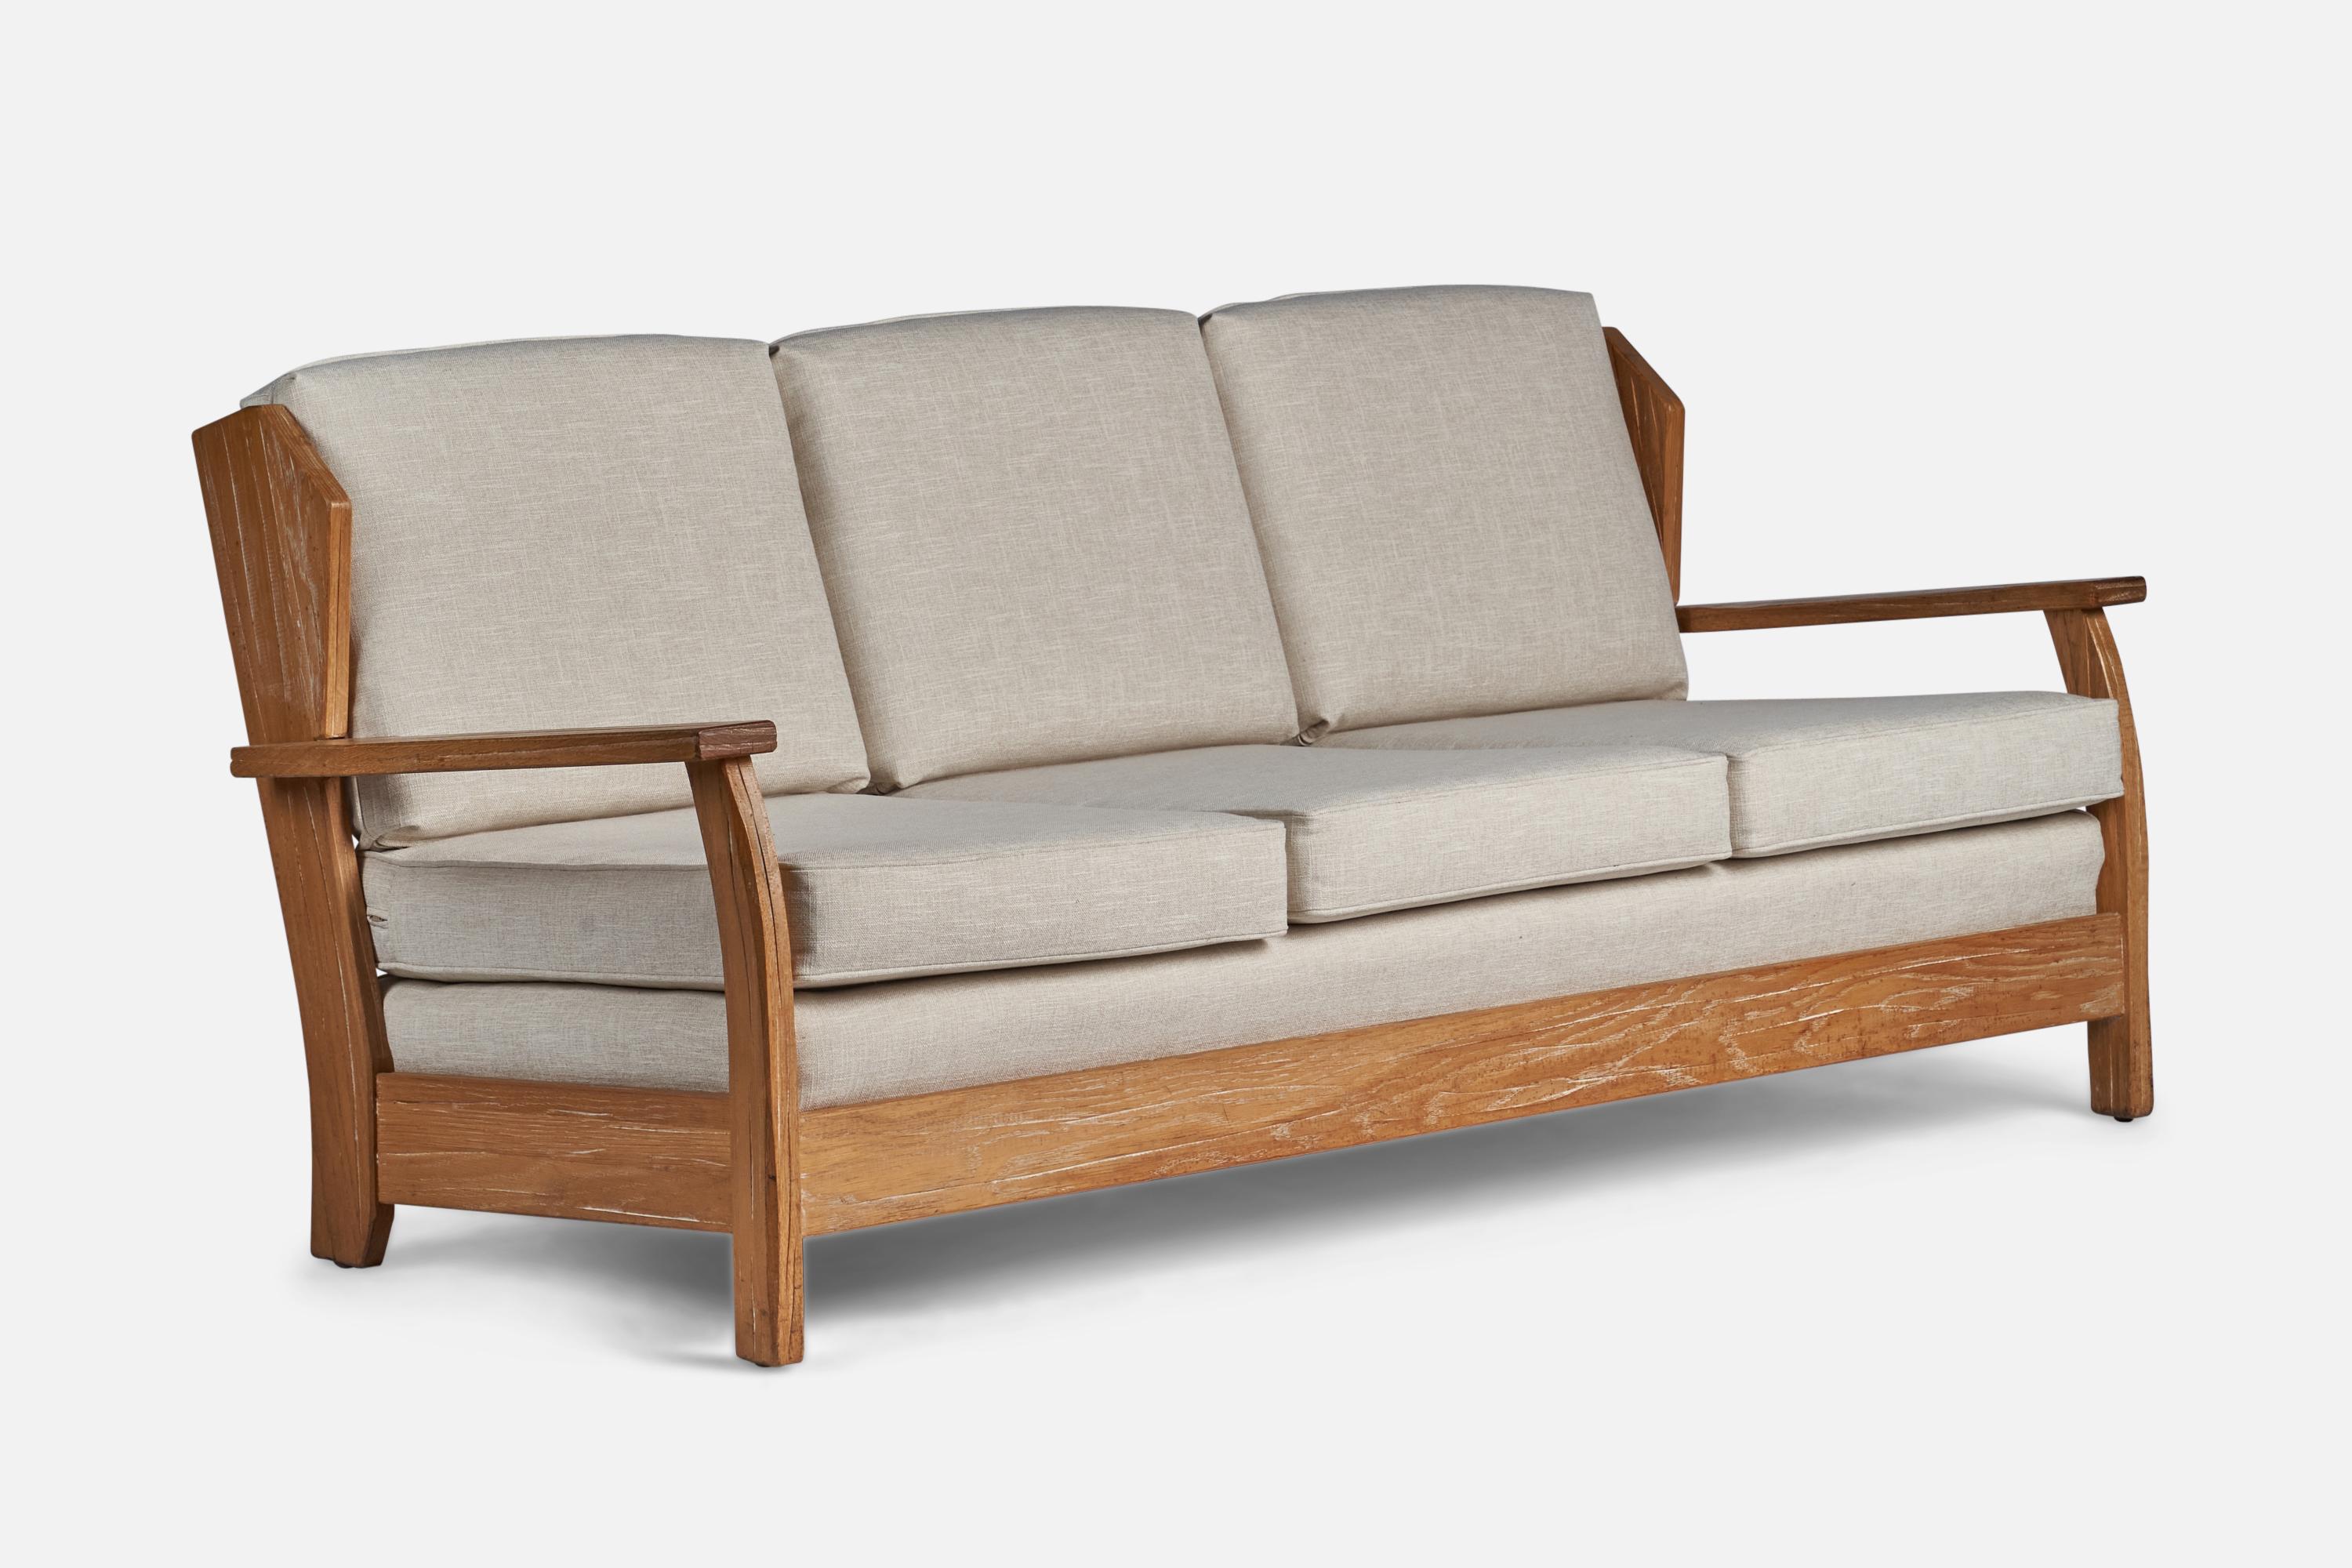 A cerused oak and off-white fabric sofa designed and produced by A. Brandt Ranch Oak, USA, c. 1950s.
16.5” seat height